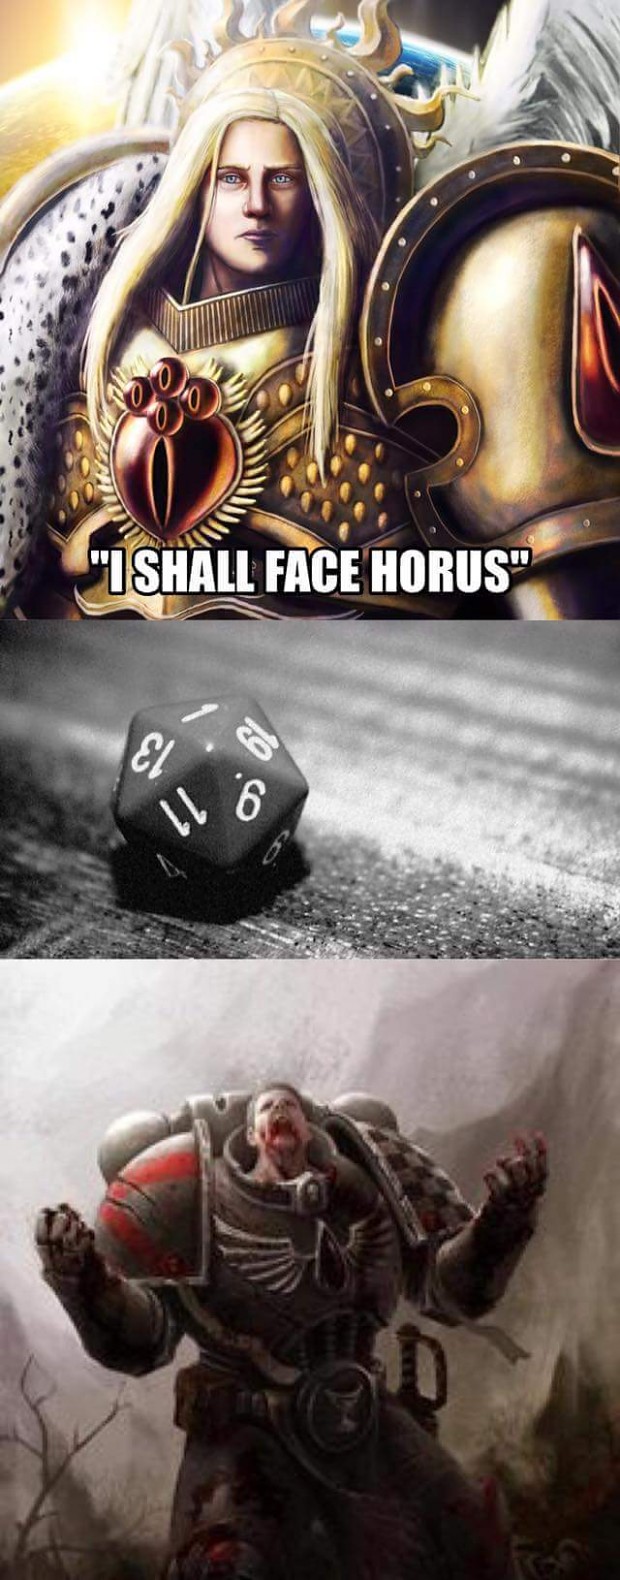 Some 40k humour